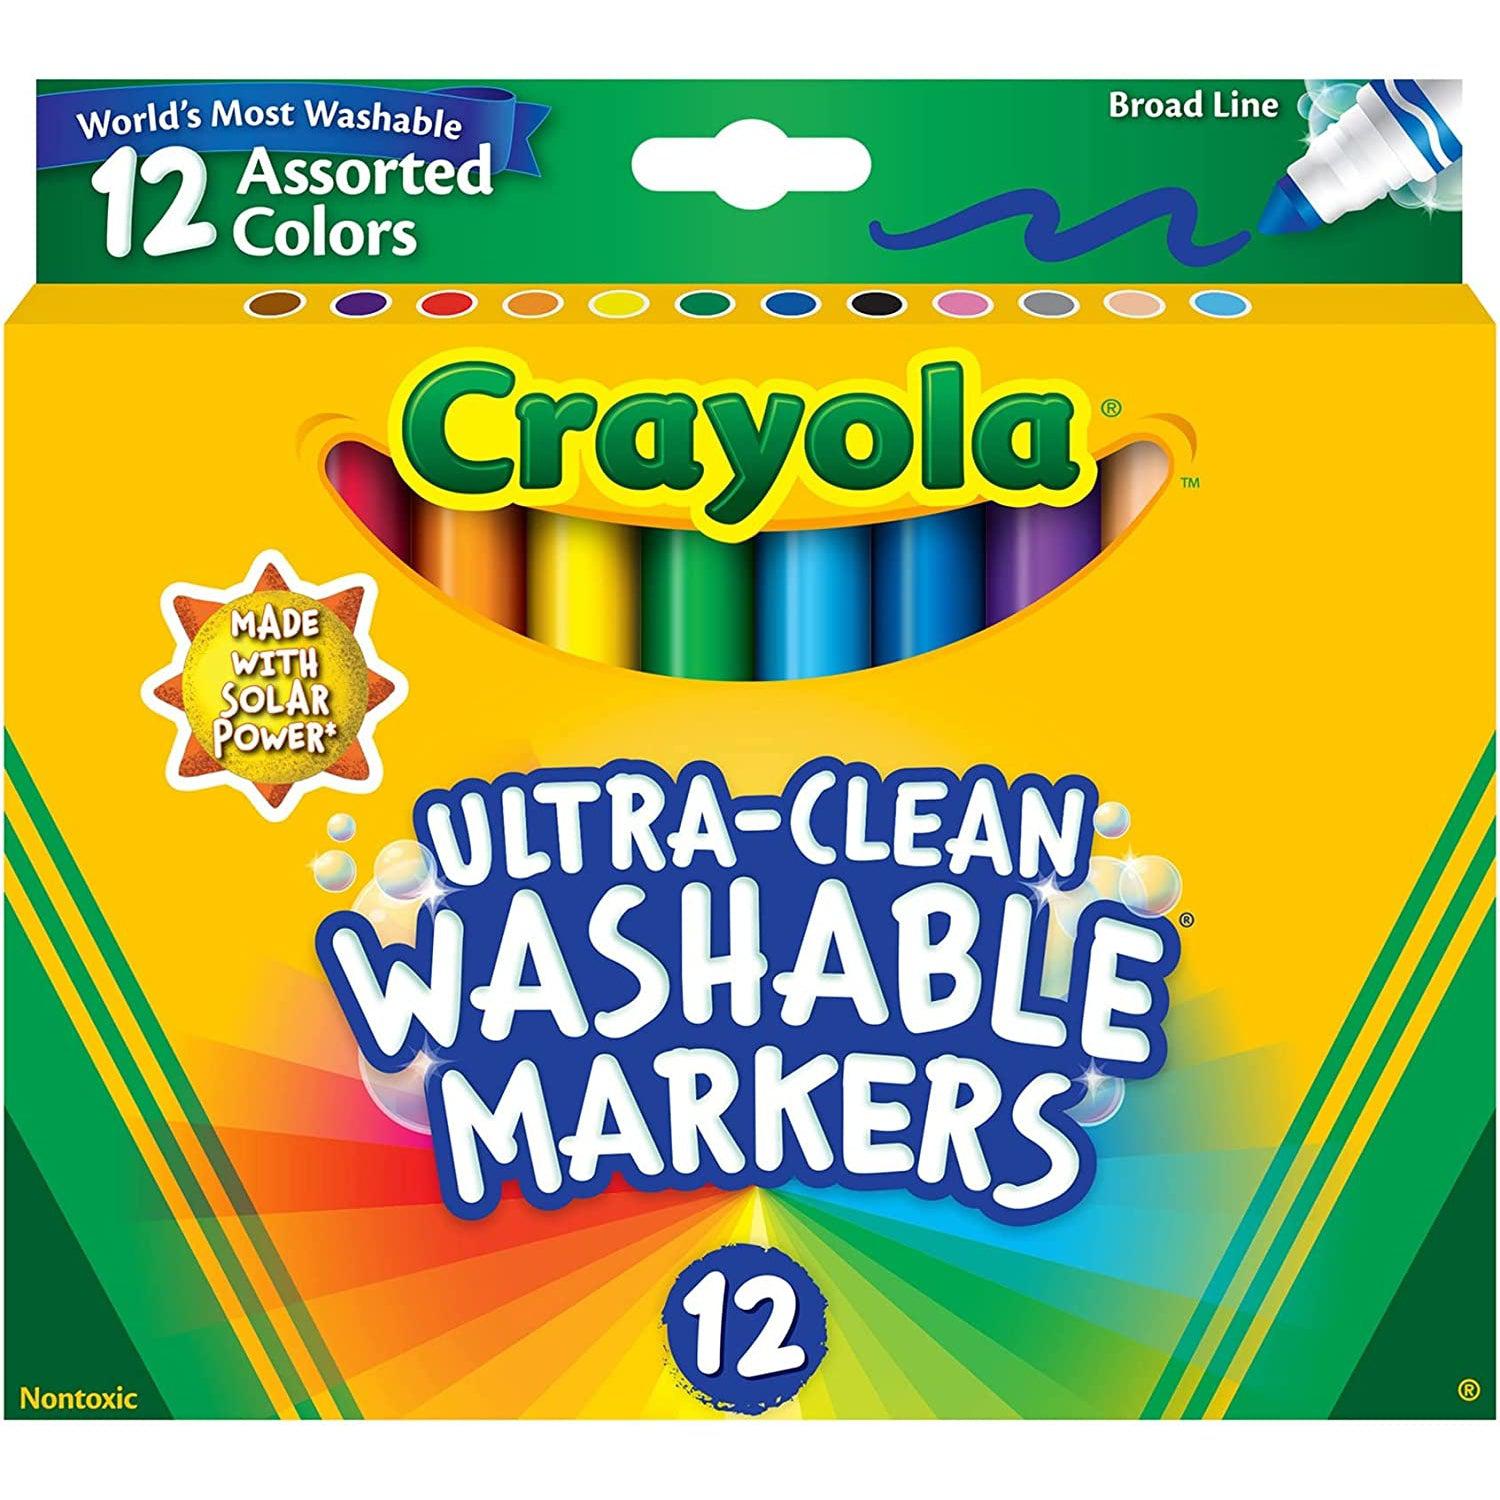 Pen + Gear Washable Dot Marker, Washable Marker, 8 Count, Ages 3+, Assorted  Colors 